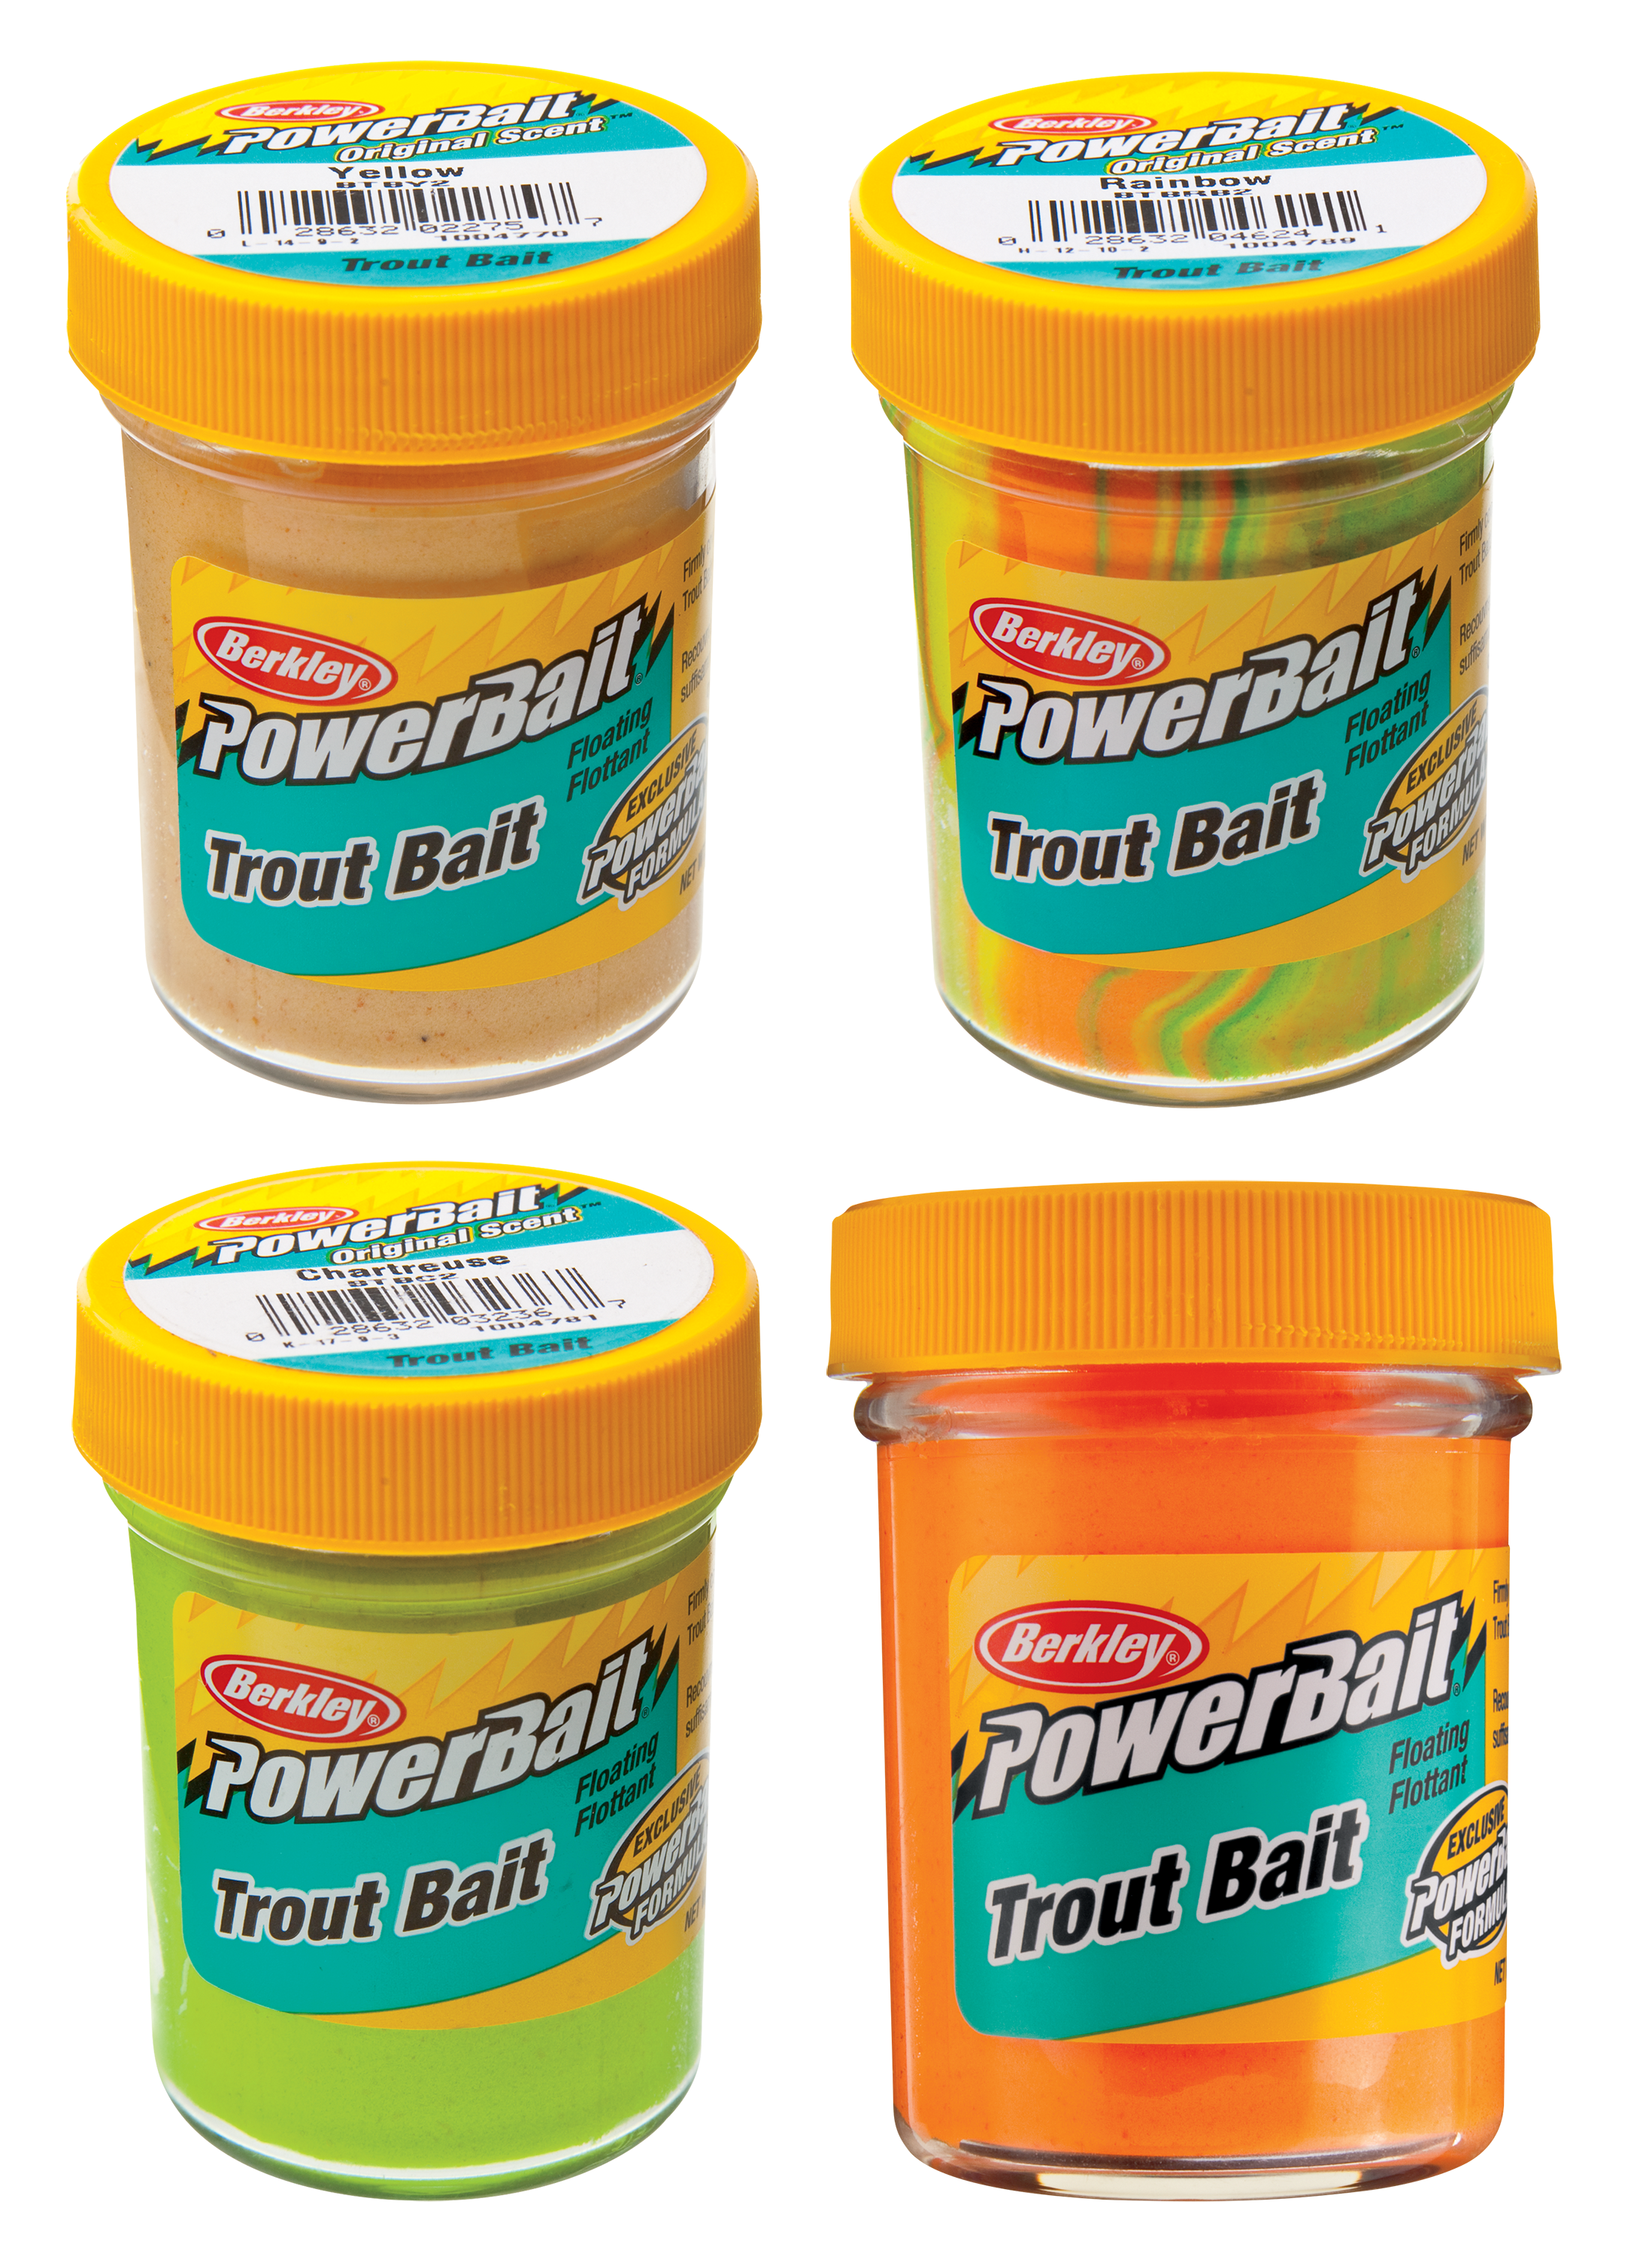 What's your favorite powerbait???